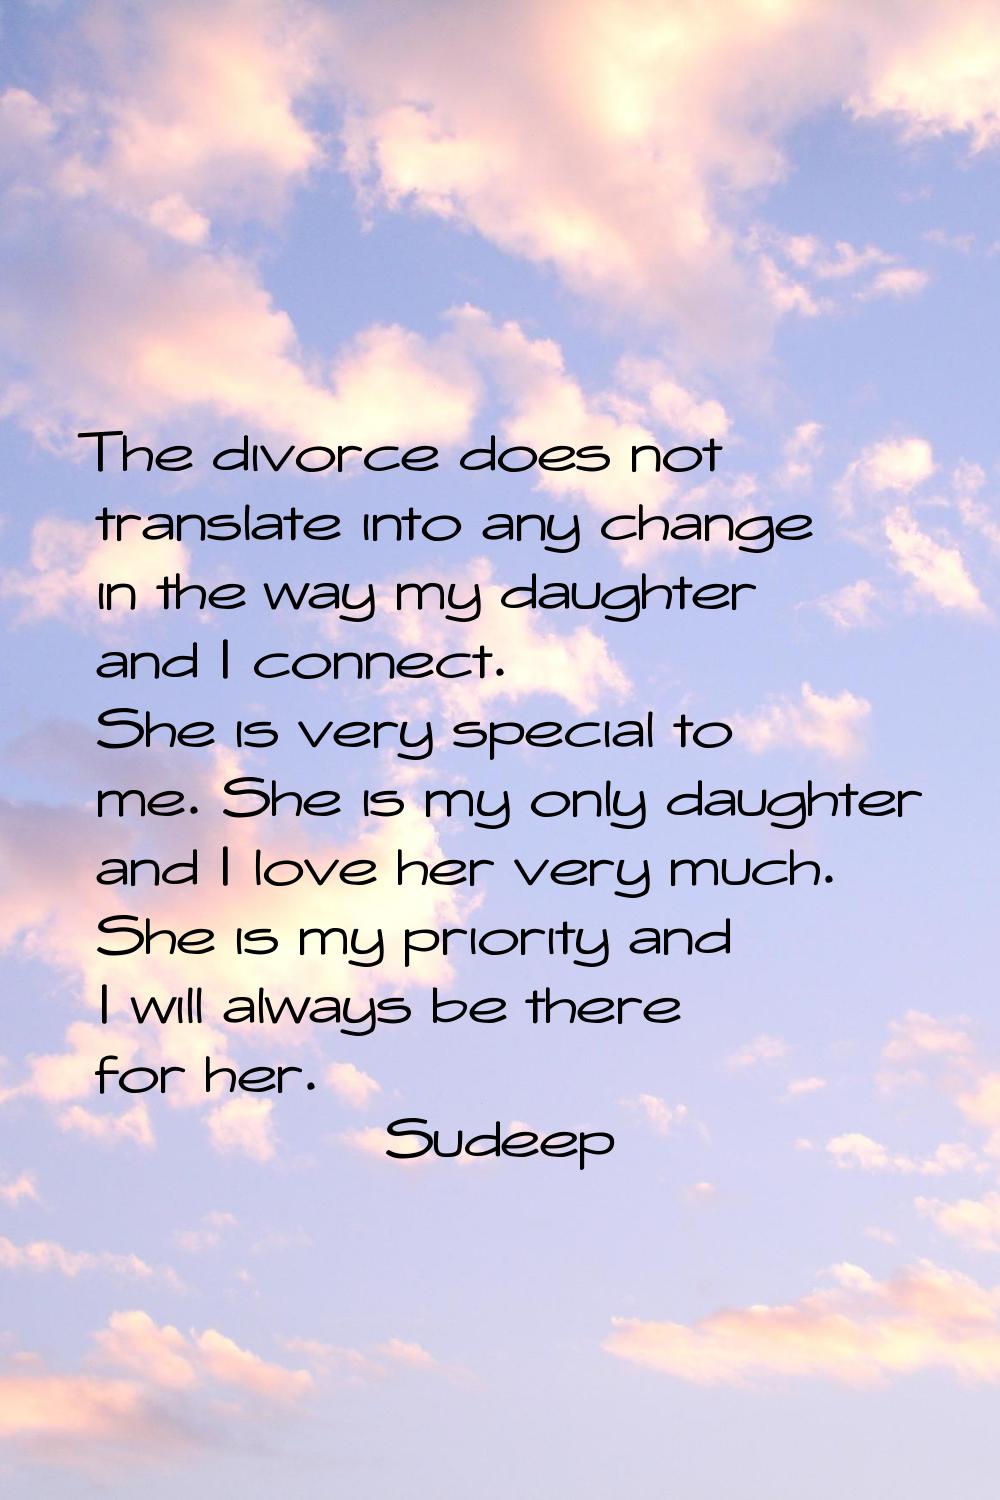 The divorce does not translate into any change in the way my daughter and I connect. She is very sp